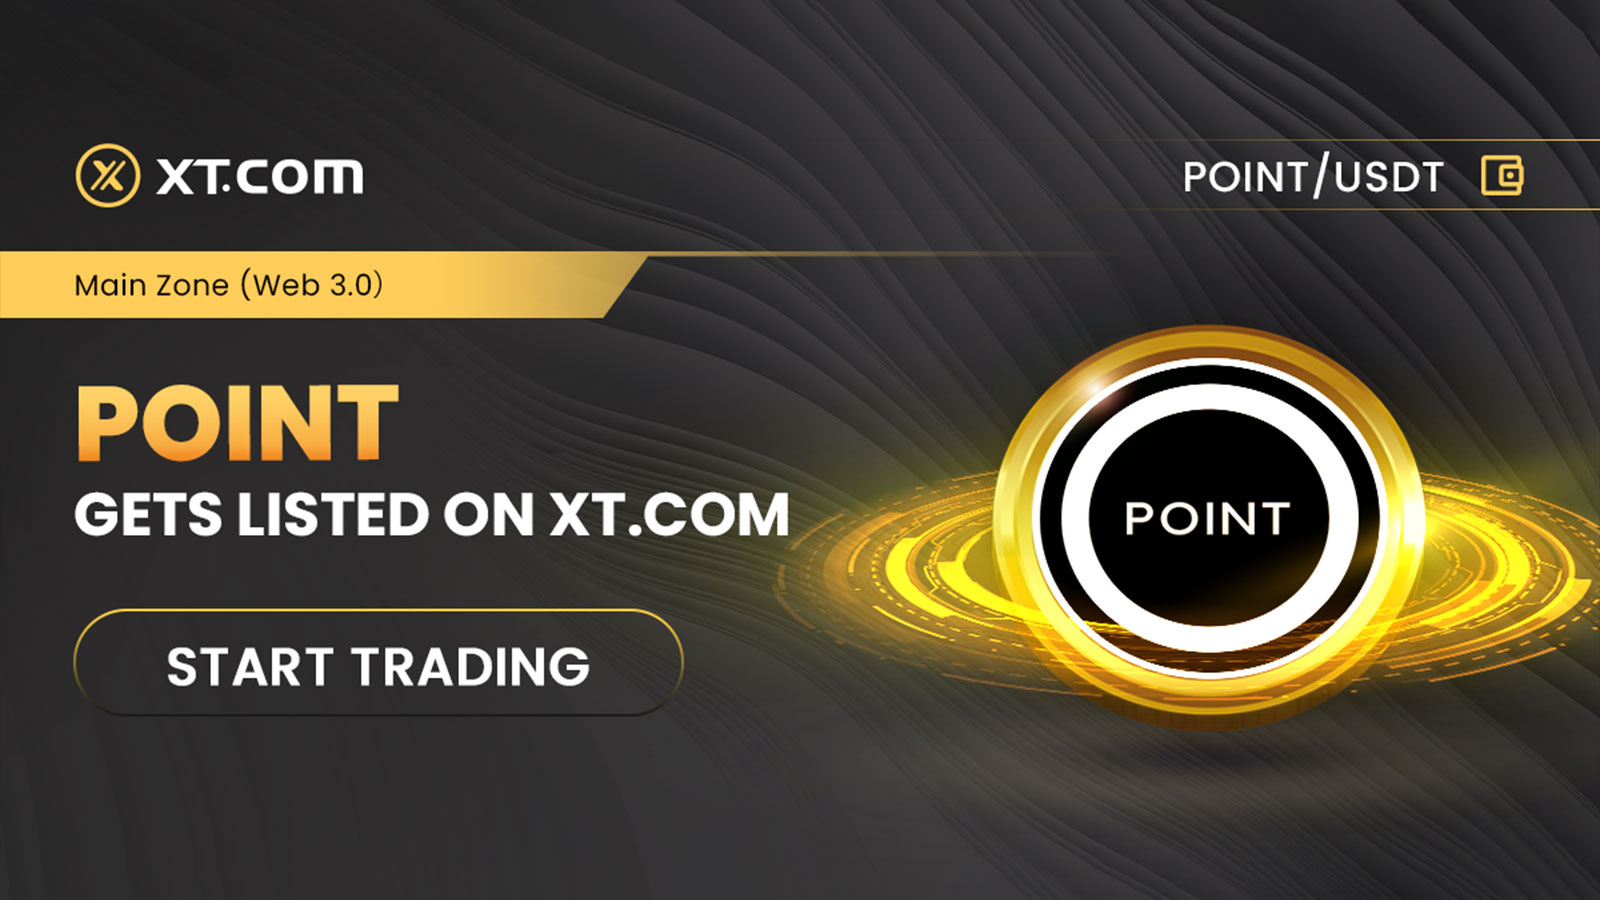 XT.COM Lists POINT In Main Zone